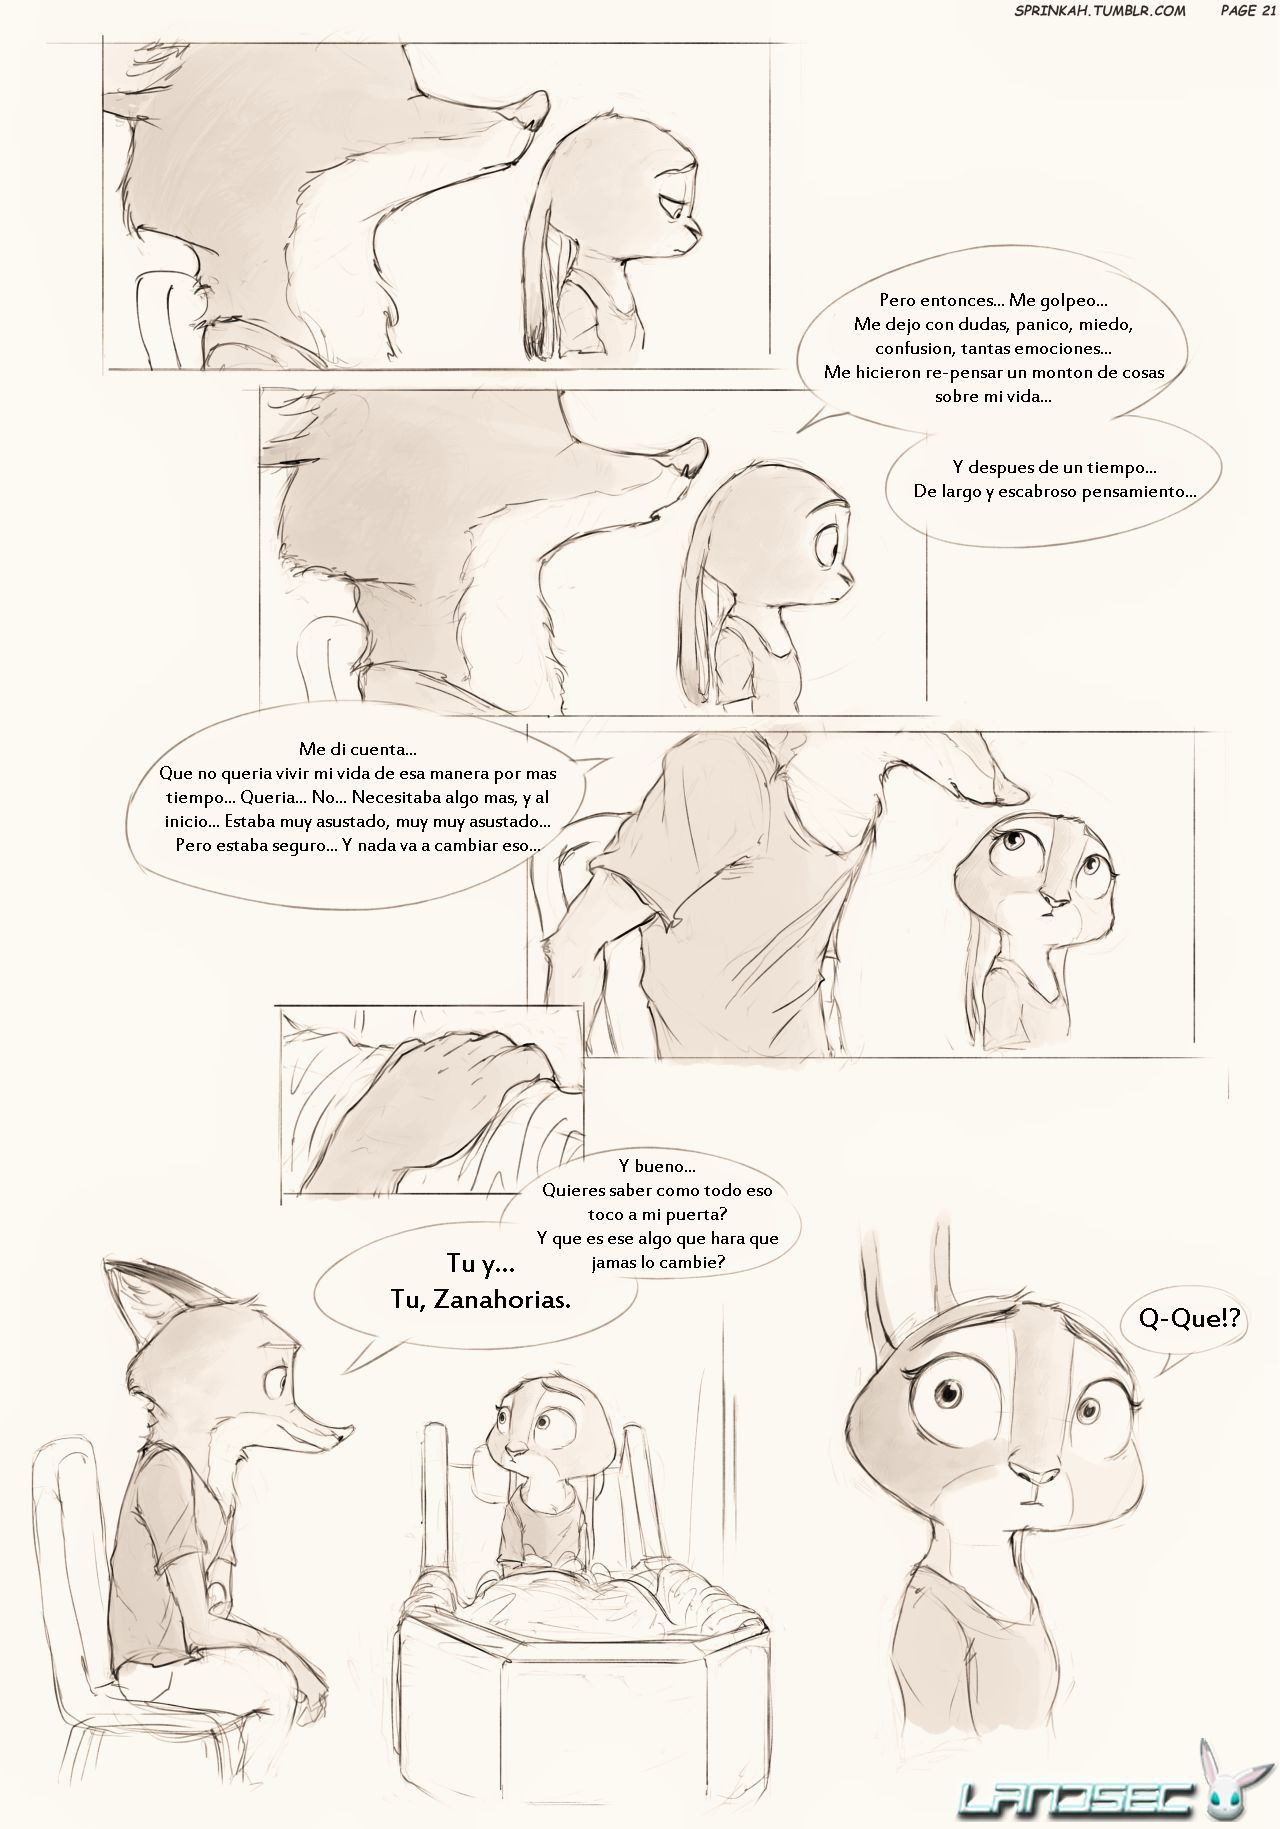 [Sprinkah] This is what true love looks like (Zootopia) (Spanish) (On Going) [Landsec] http://sprinkah.tumblr.com/ 32